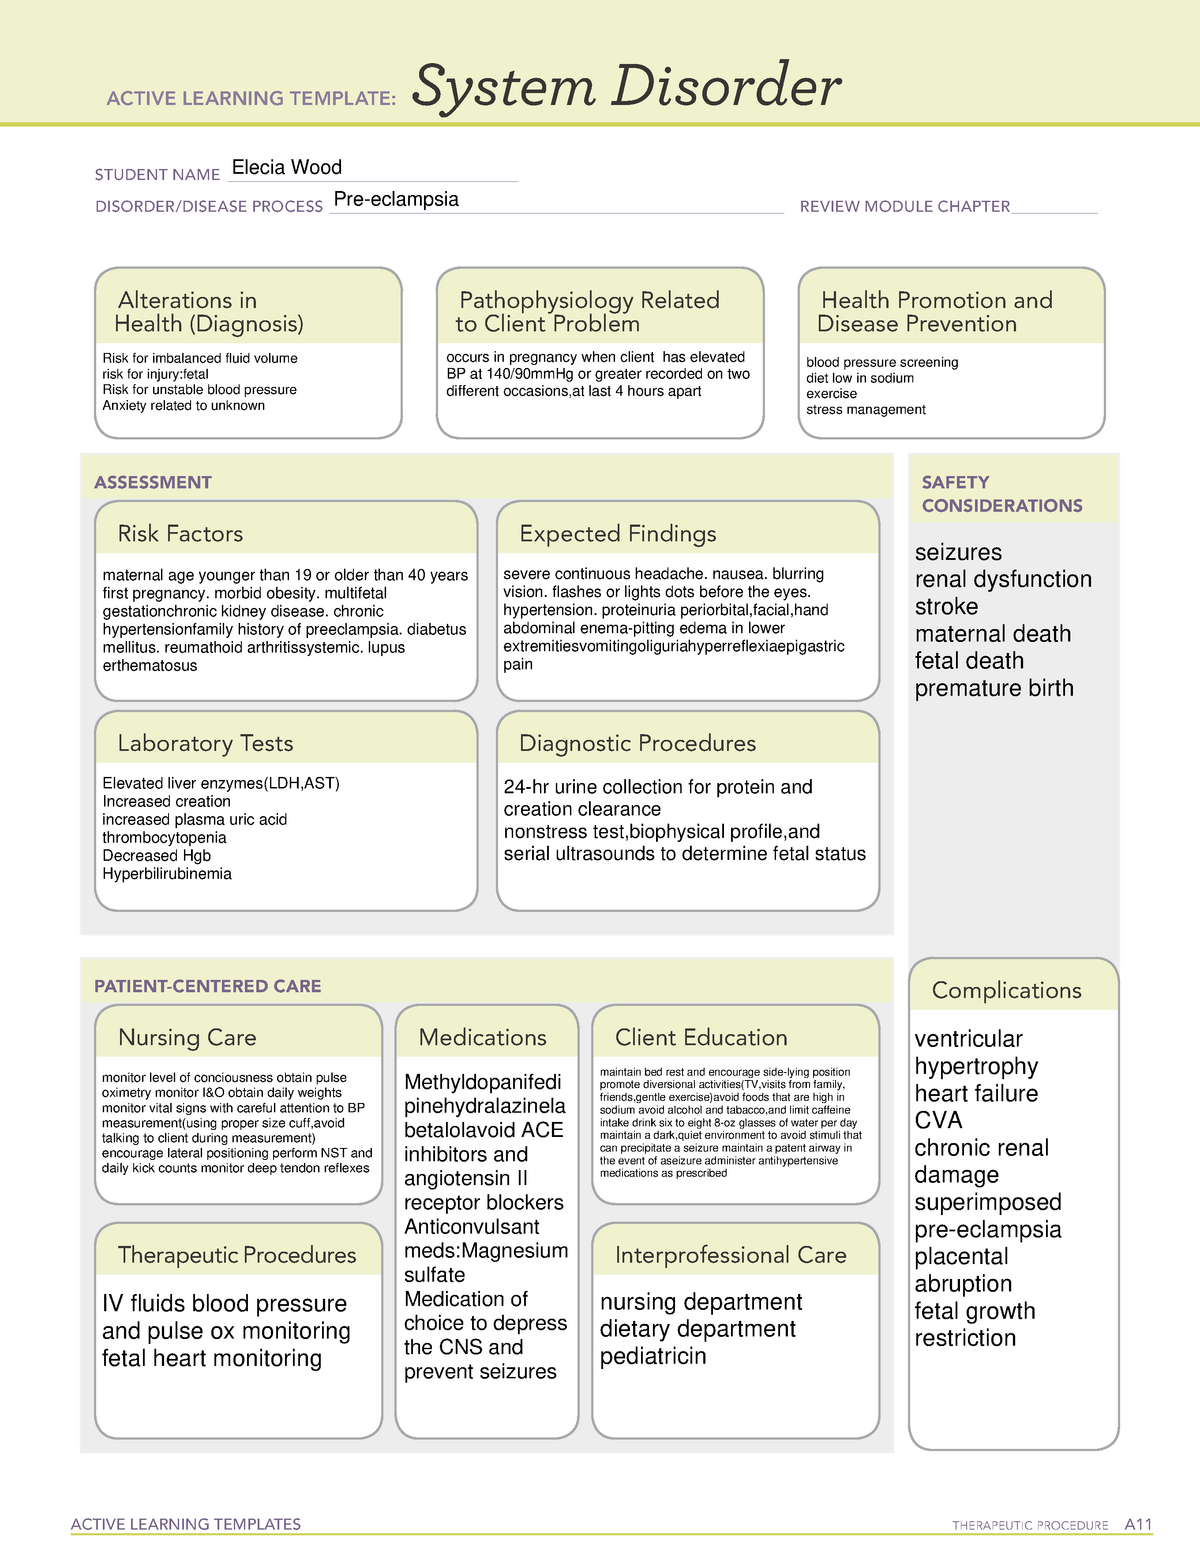 Preeclampsia Maternal Clinical 01252021 ACTIVE LEARNING TEMPLATES